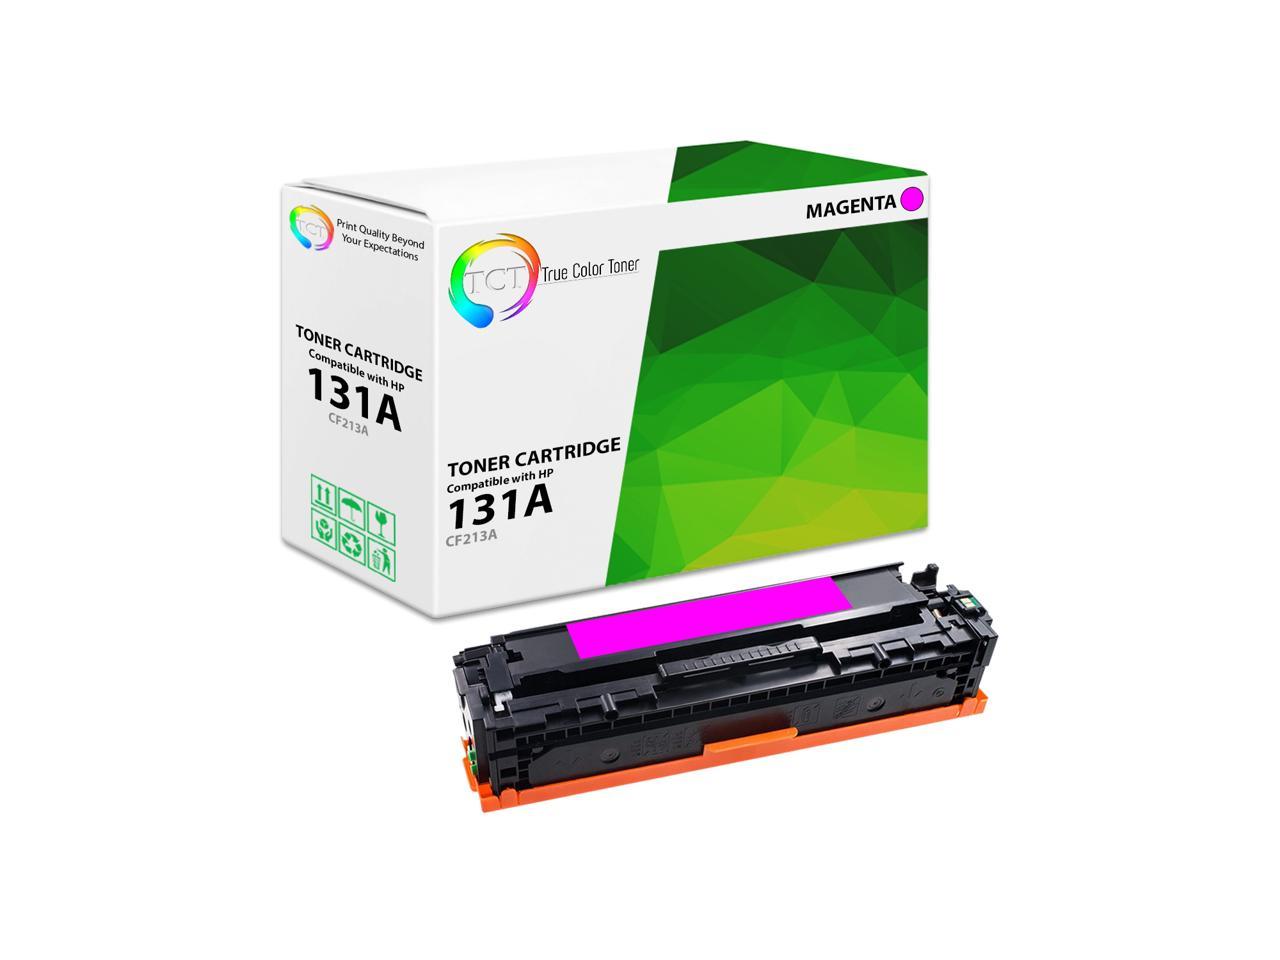 Tct Premium Compatible Toner Cartridge Replacement For Hp 131a Cf213a Magenta Works With Hp Laserjet Pro 200 Color M251nw Mfp M276n Printers 1 800 Pages Newegg Com